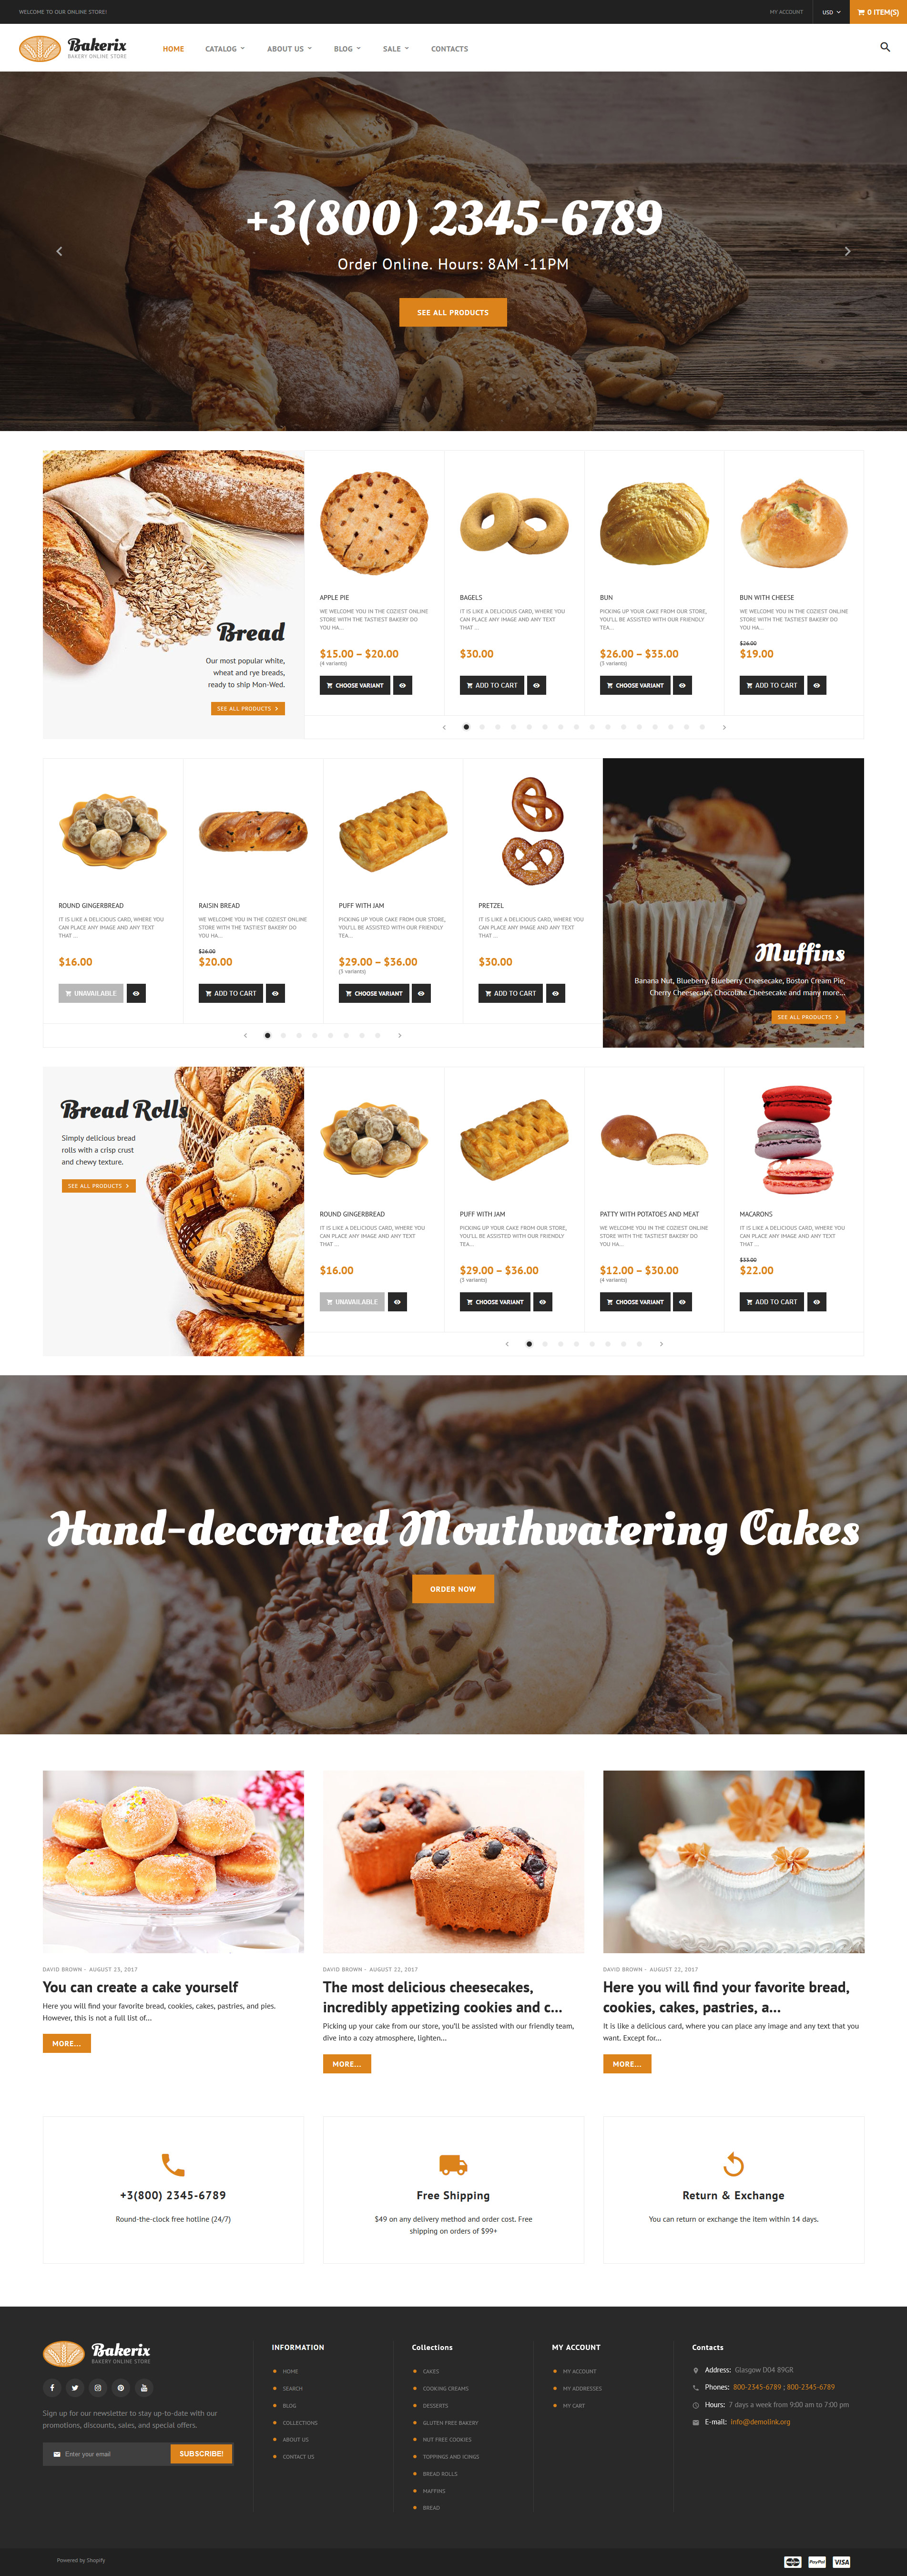 Bakery Responsive Online Store Shopify Theme